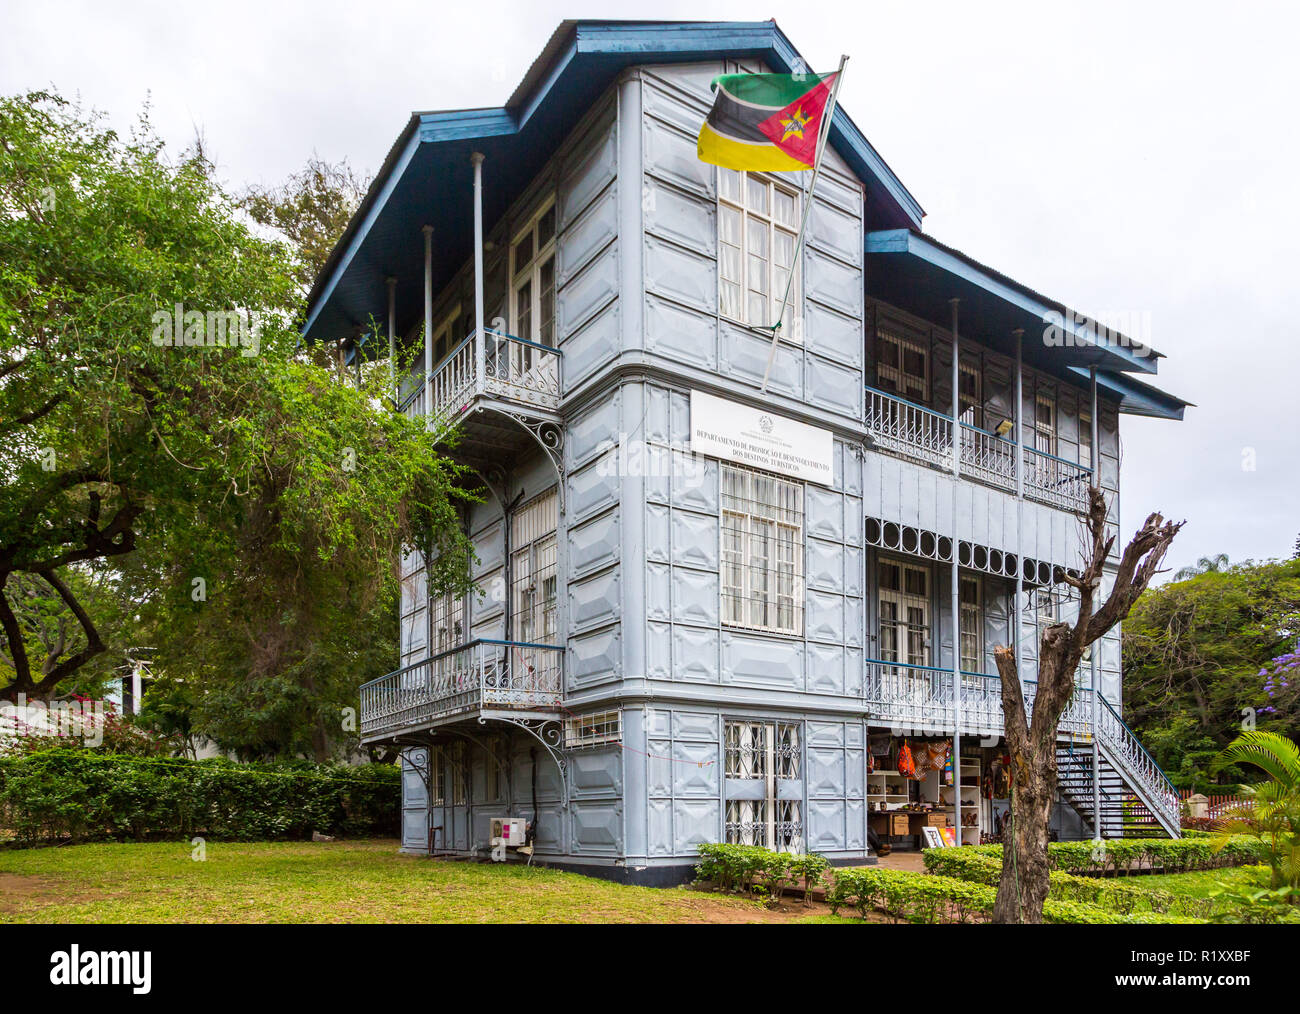 The Iron House (Casa de Ferro), Maputo, Mozambique (Mozambic) made entirely of iron, designed by Alexandre Gustave Eiffel. Now Ministry of Culture. Stock Photo